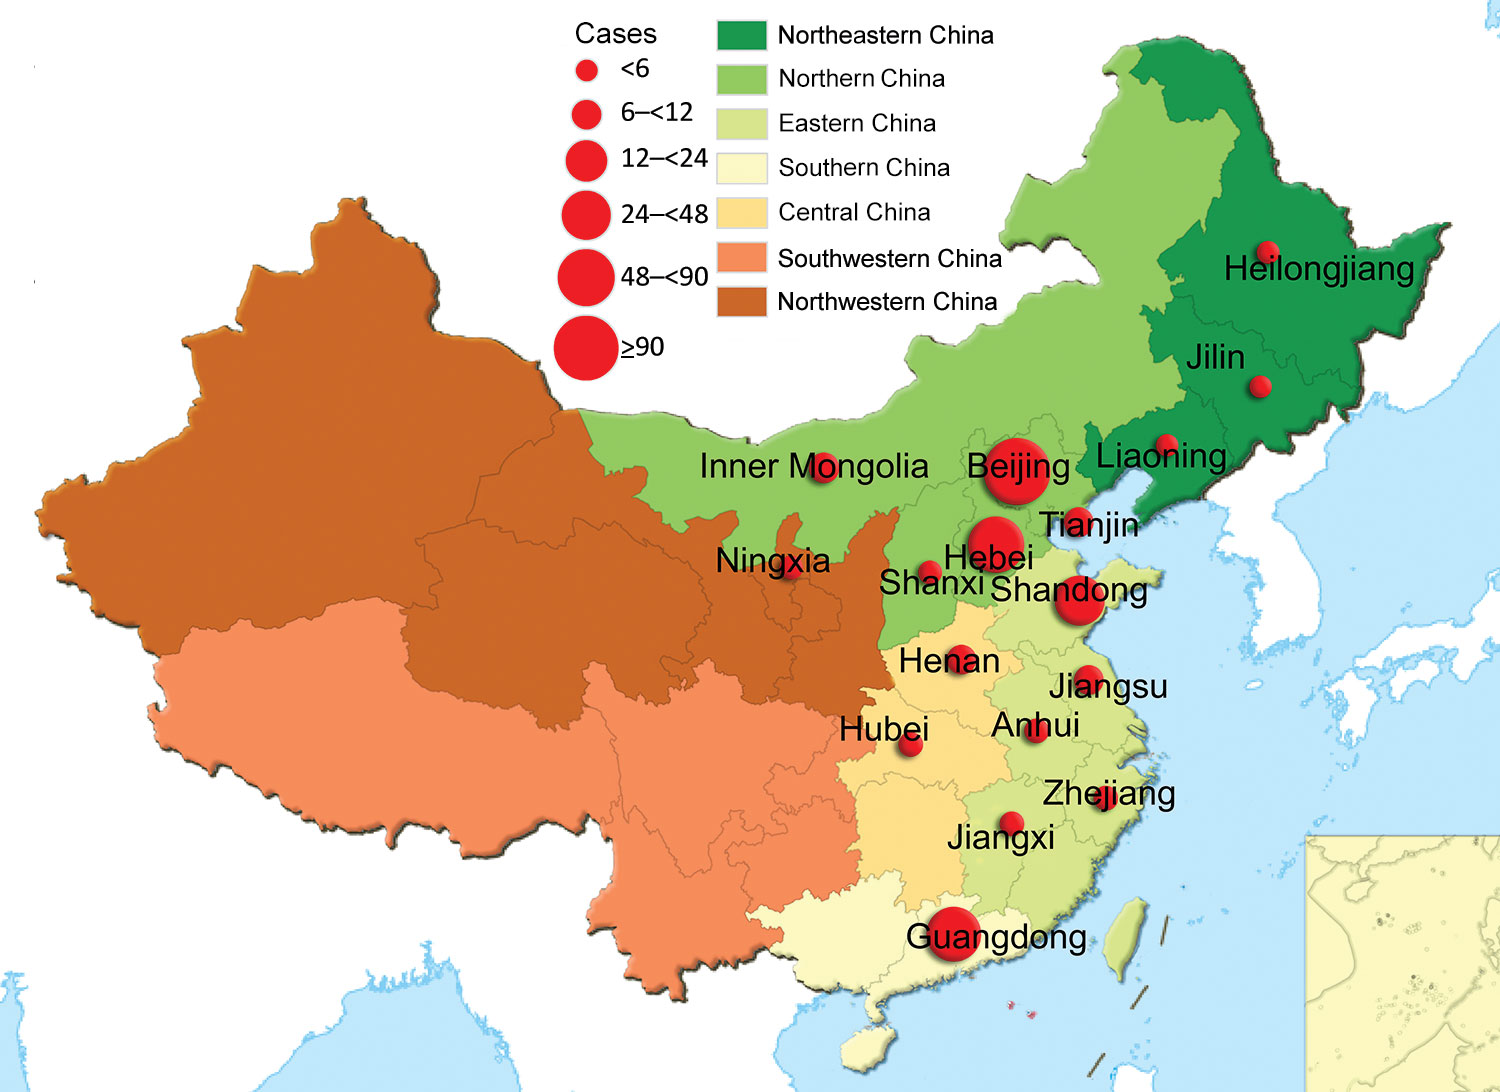 Geographic distribution of 335 patients with pertussis diagnosis, China, 2014–2016. Colors indicate different administrative regions. Red circles indicate numbers of patients; the larger the circle, the more patients in the province.